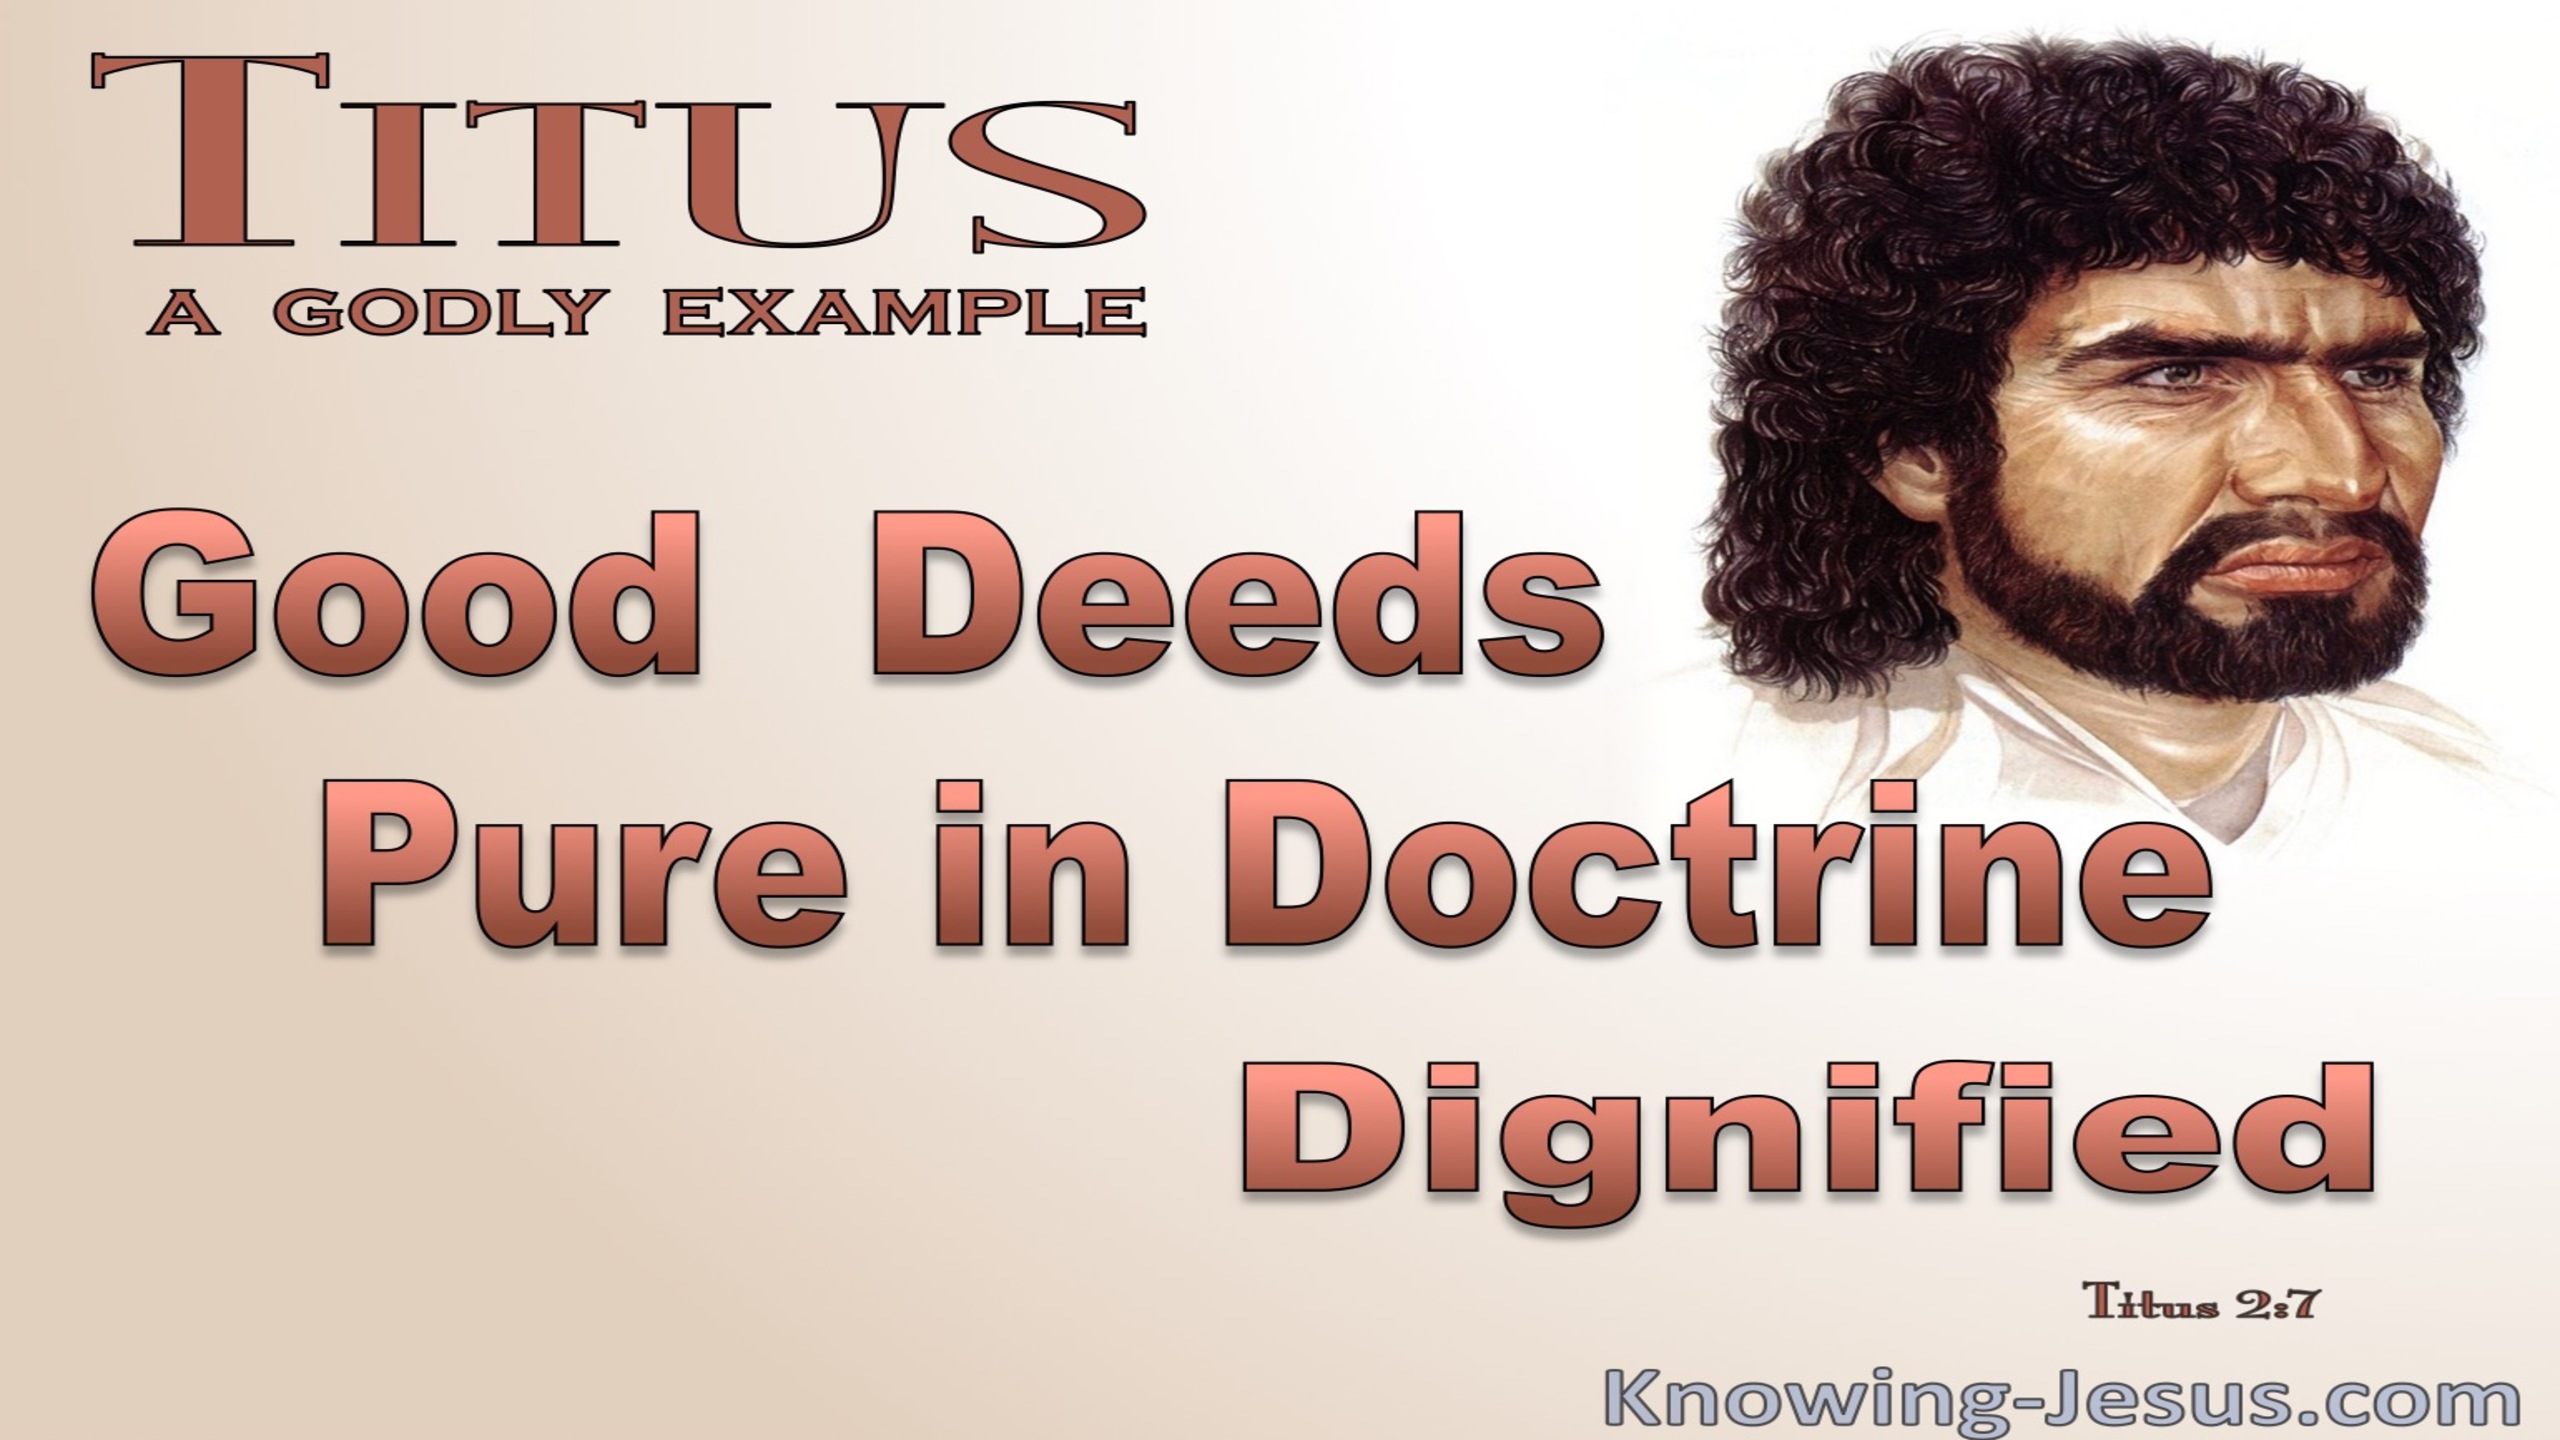 Titus 2:7 An Example Of Good Deeds Pure Doctrine Dignified (brown)